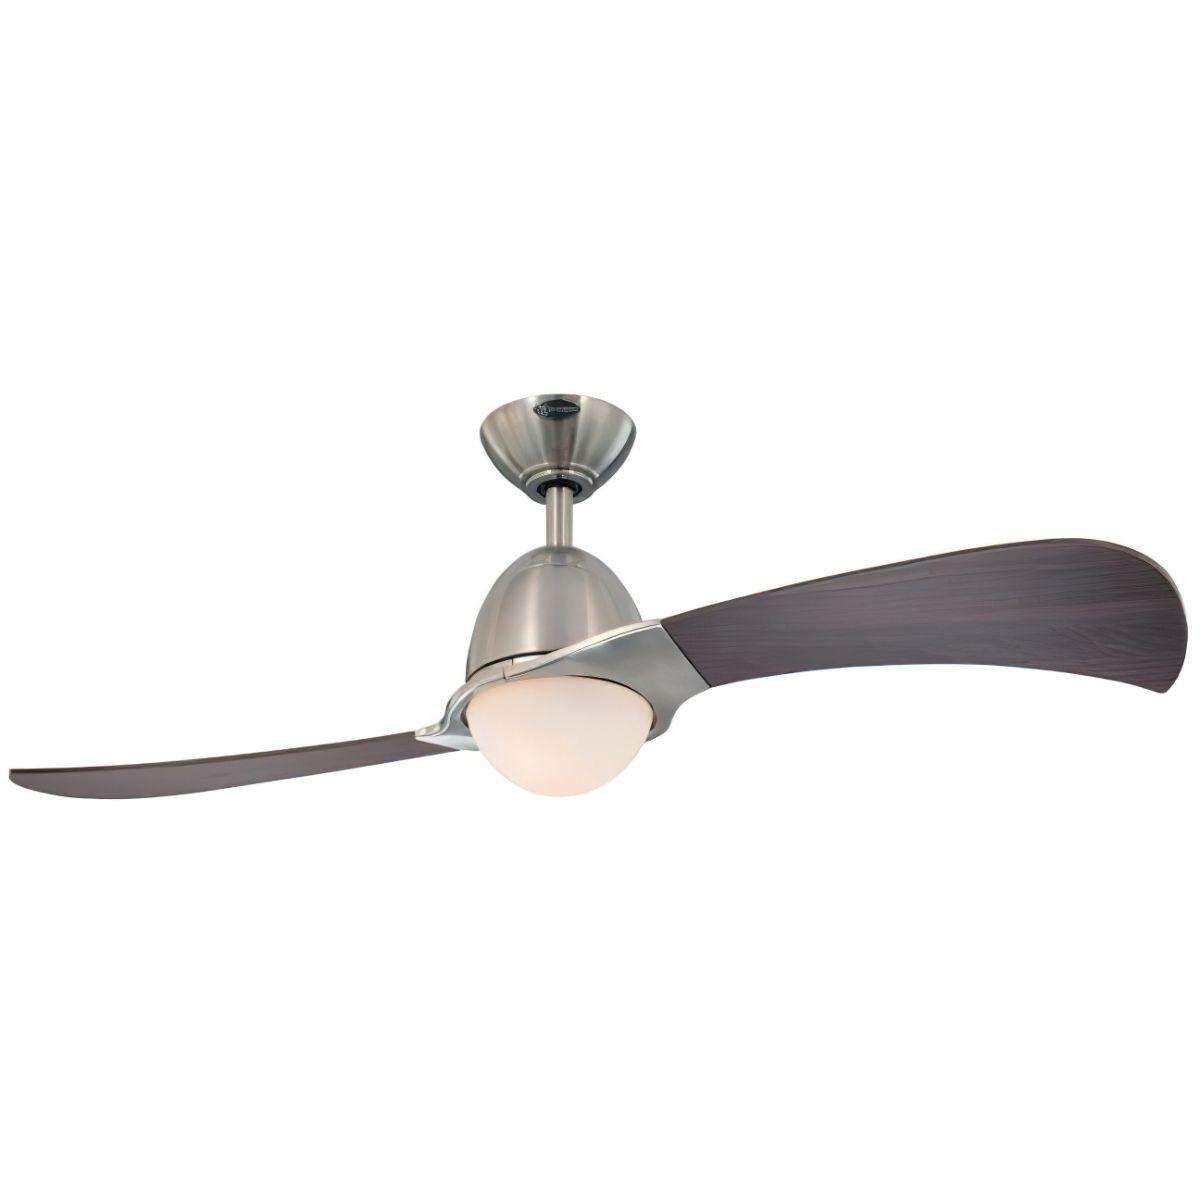 Solana 48 Inch 2 Blades Propeller Ceiling Fan With Light And Remote, Brushed Nickel Finish